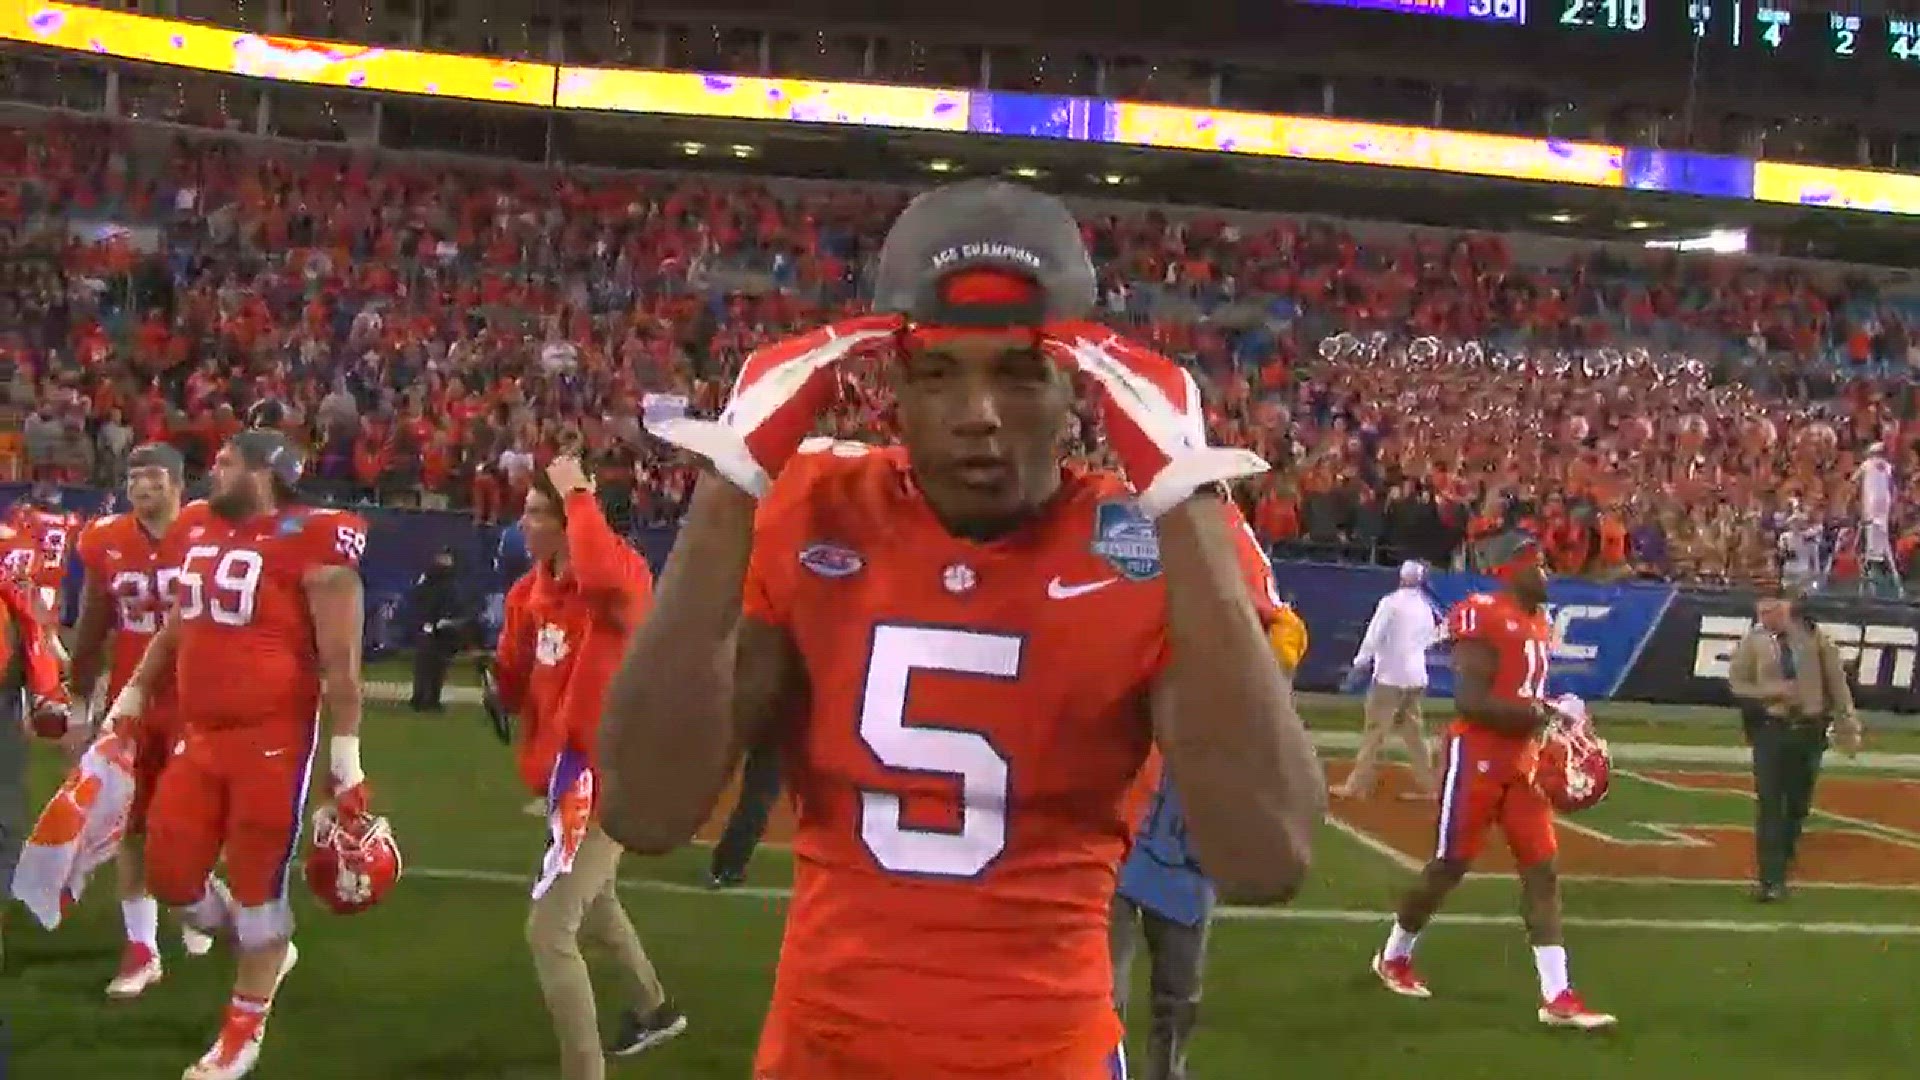 The Clemson Tigers three-peat as ACC Champions with a 38-3 win over Miami. Some of the players talked about winning another conference crown as the confetti fell. Blythewood's Jalen Williams, Hammond's Cannon Smith, Travis Etienne Jr and Deon Cain talk ab